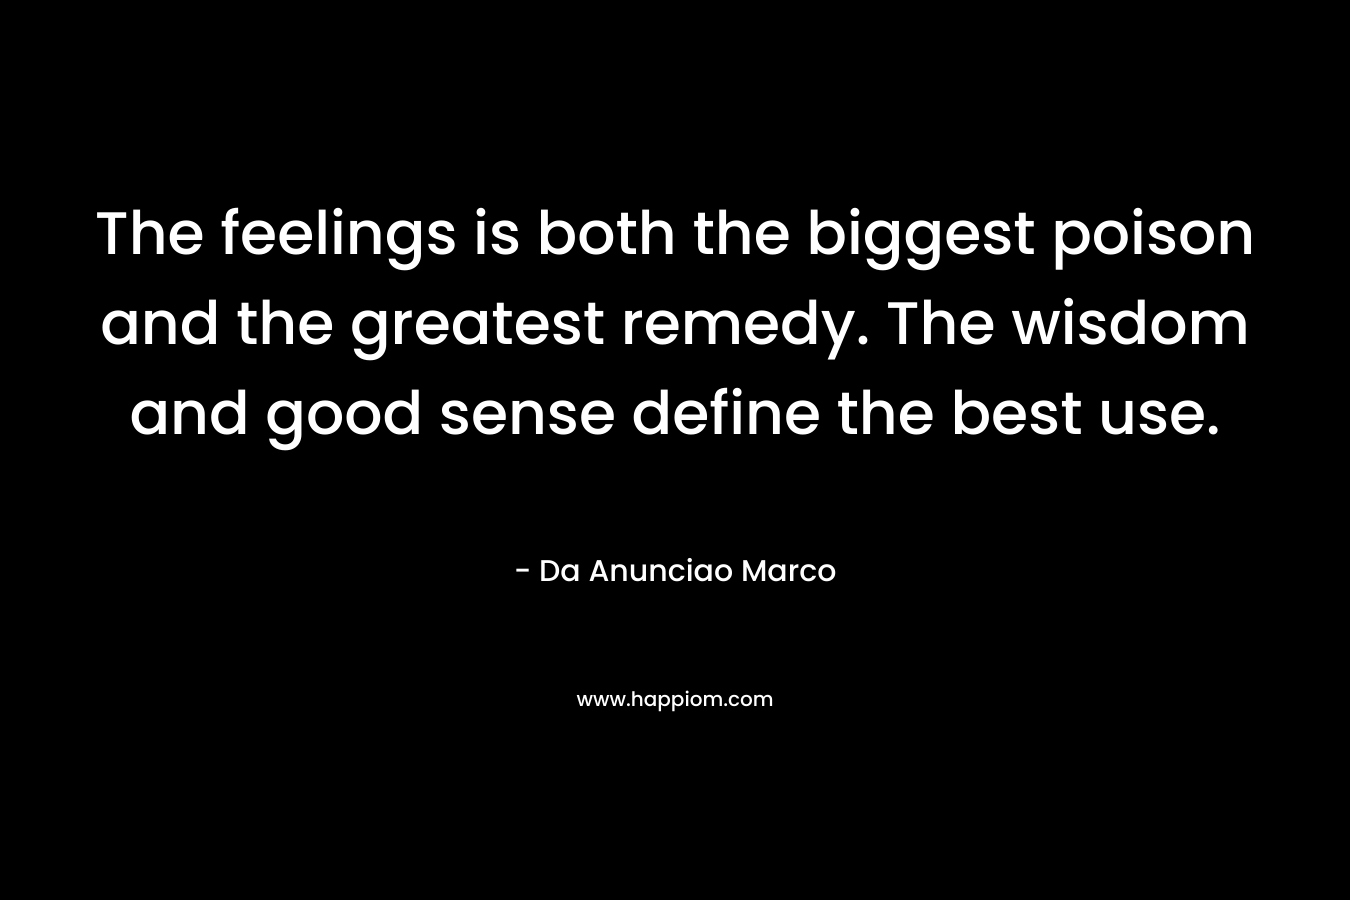 The feelings is both the biggest poison and the greatest remedy. The wisdom and good sense define the best use.